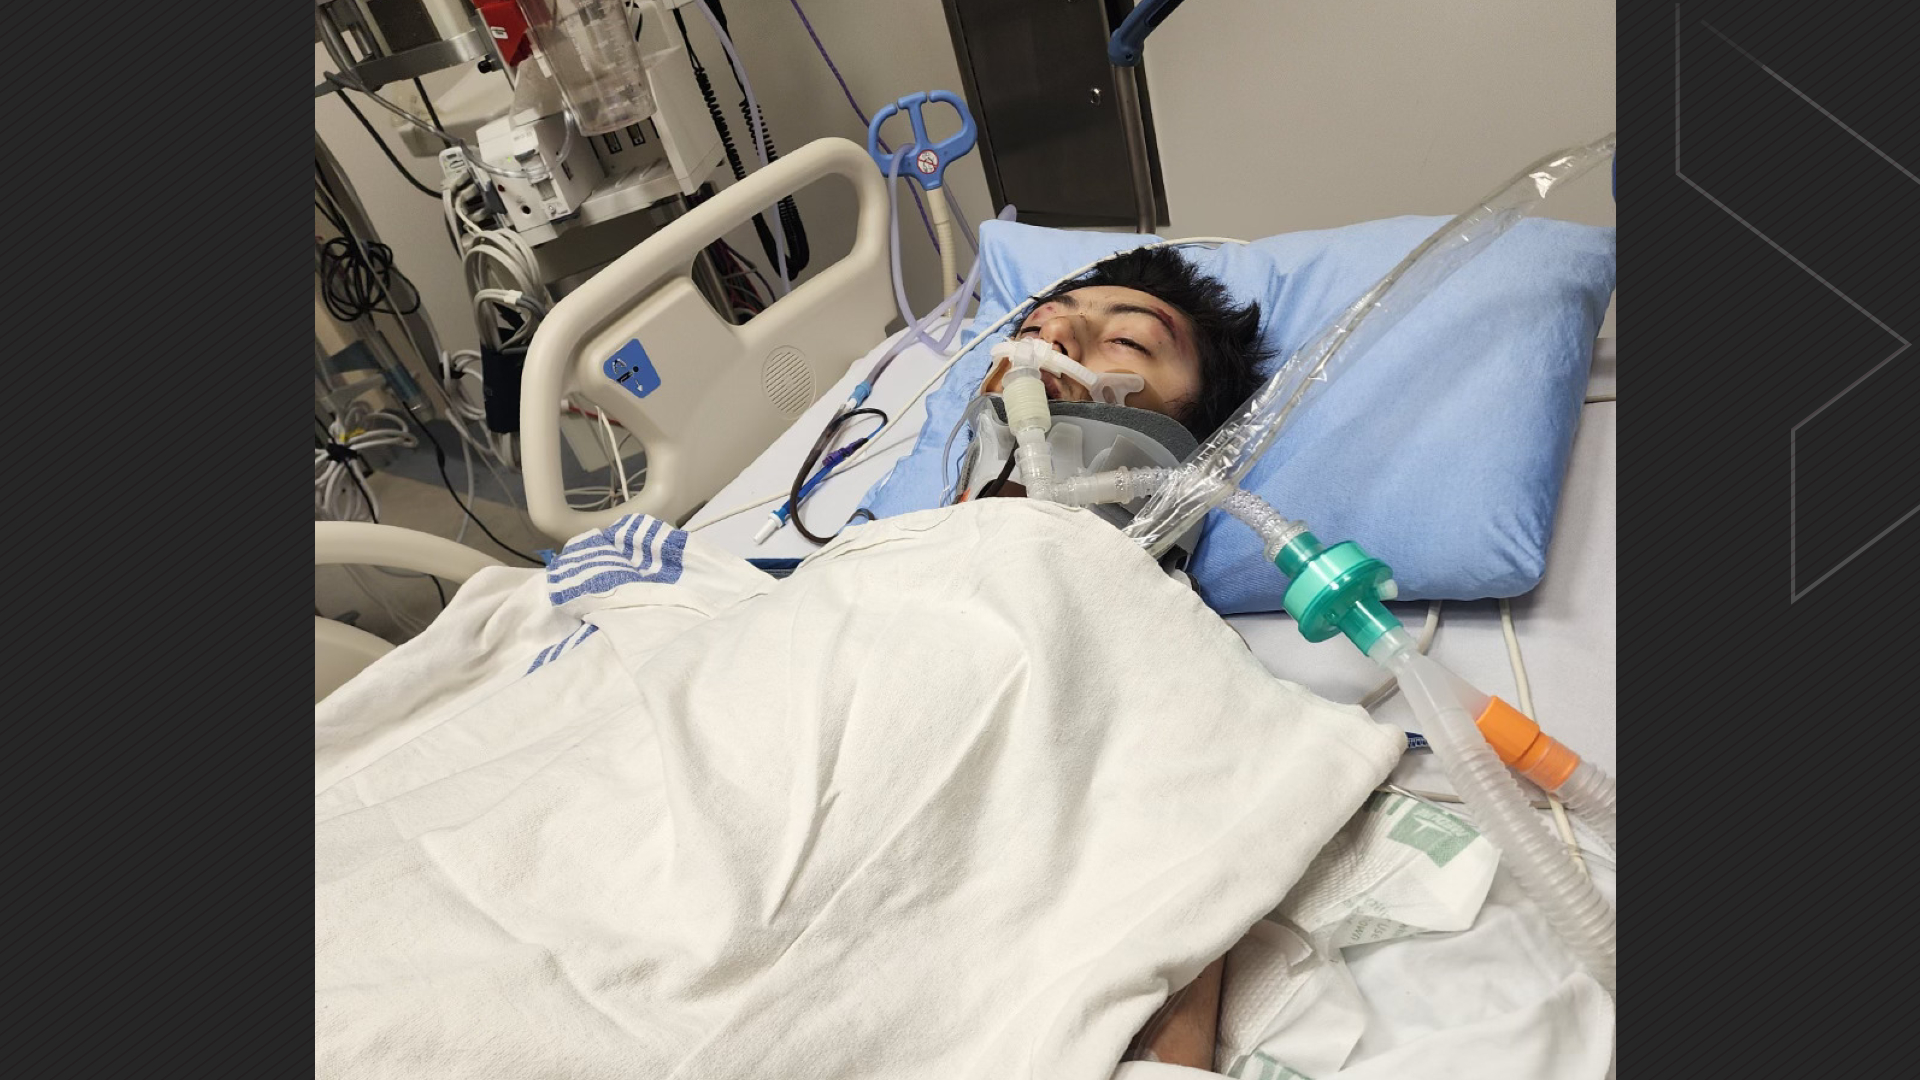 Calgary teen faces long road to recovery after being struck by 2 vehicles